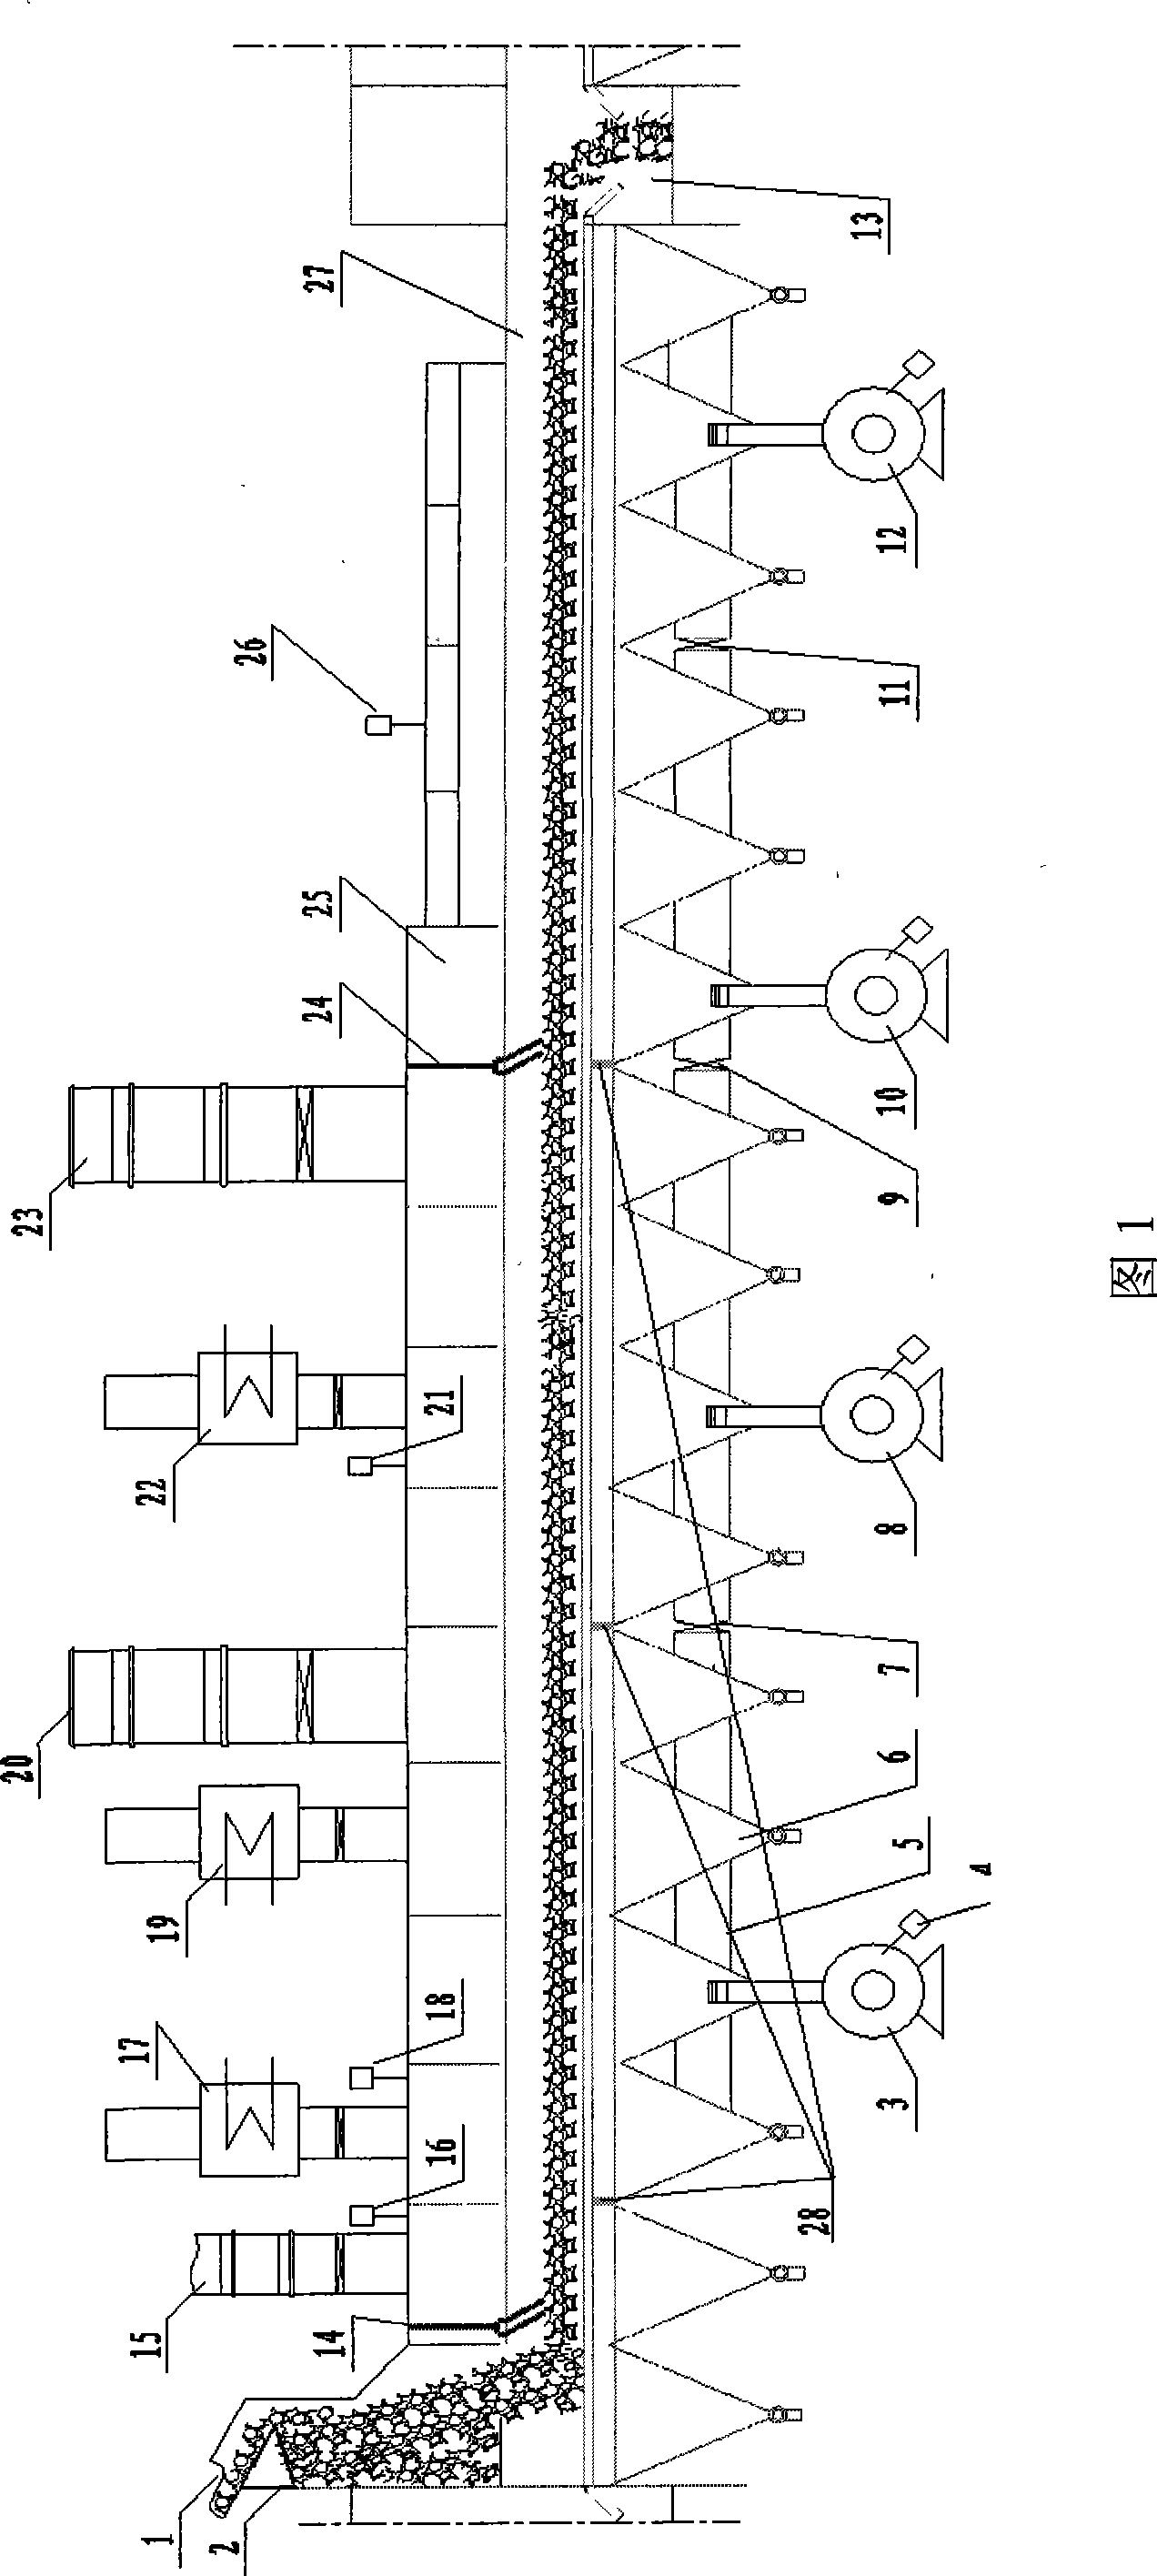 Control method for stabilizing and enhancing sintered ring cooling wind temperature while smelting steel